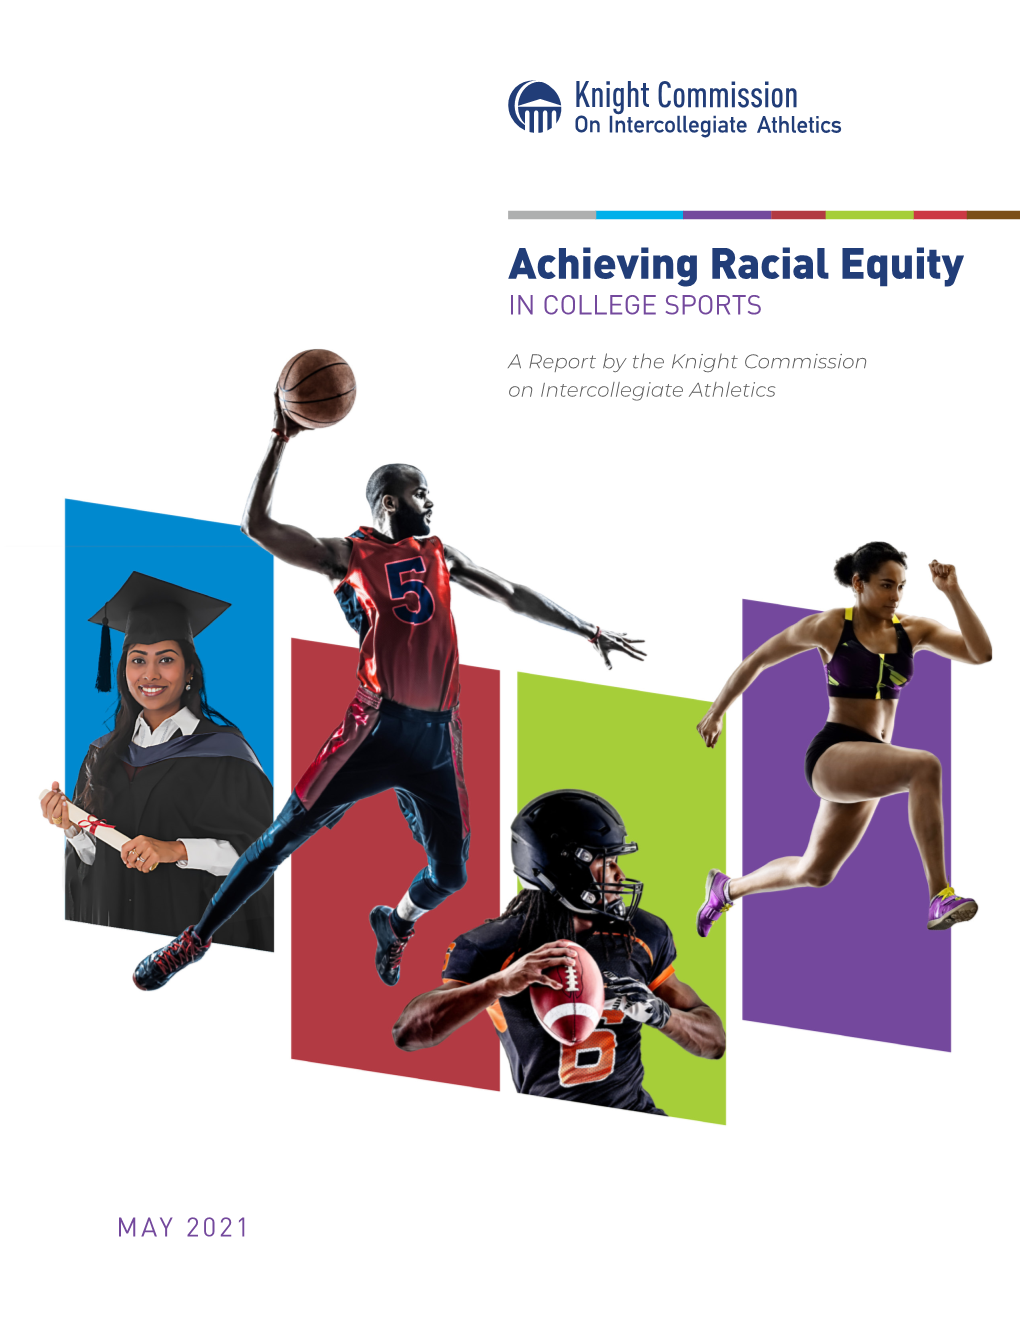 Achieving Racial Equity in College Sports (2021)